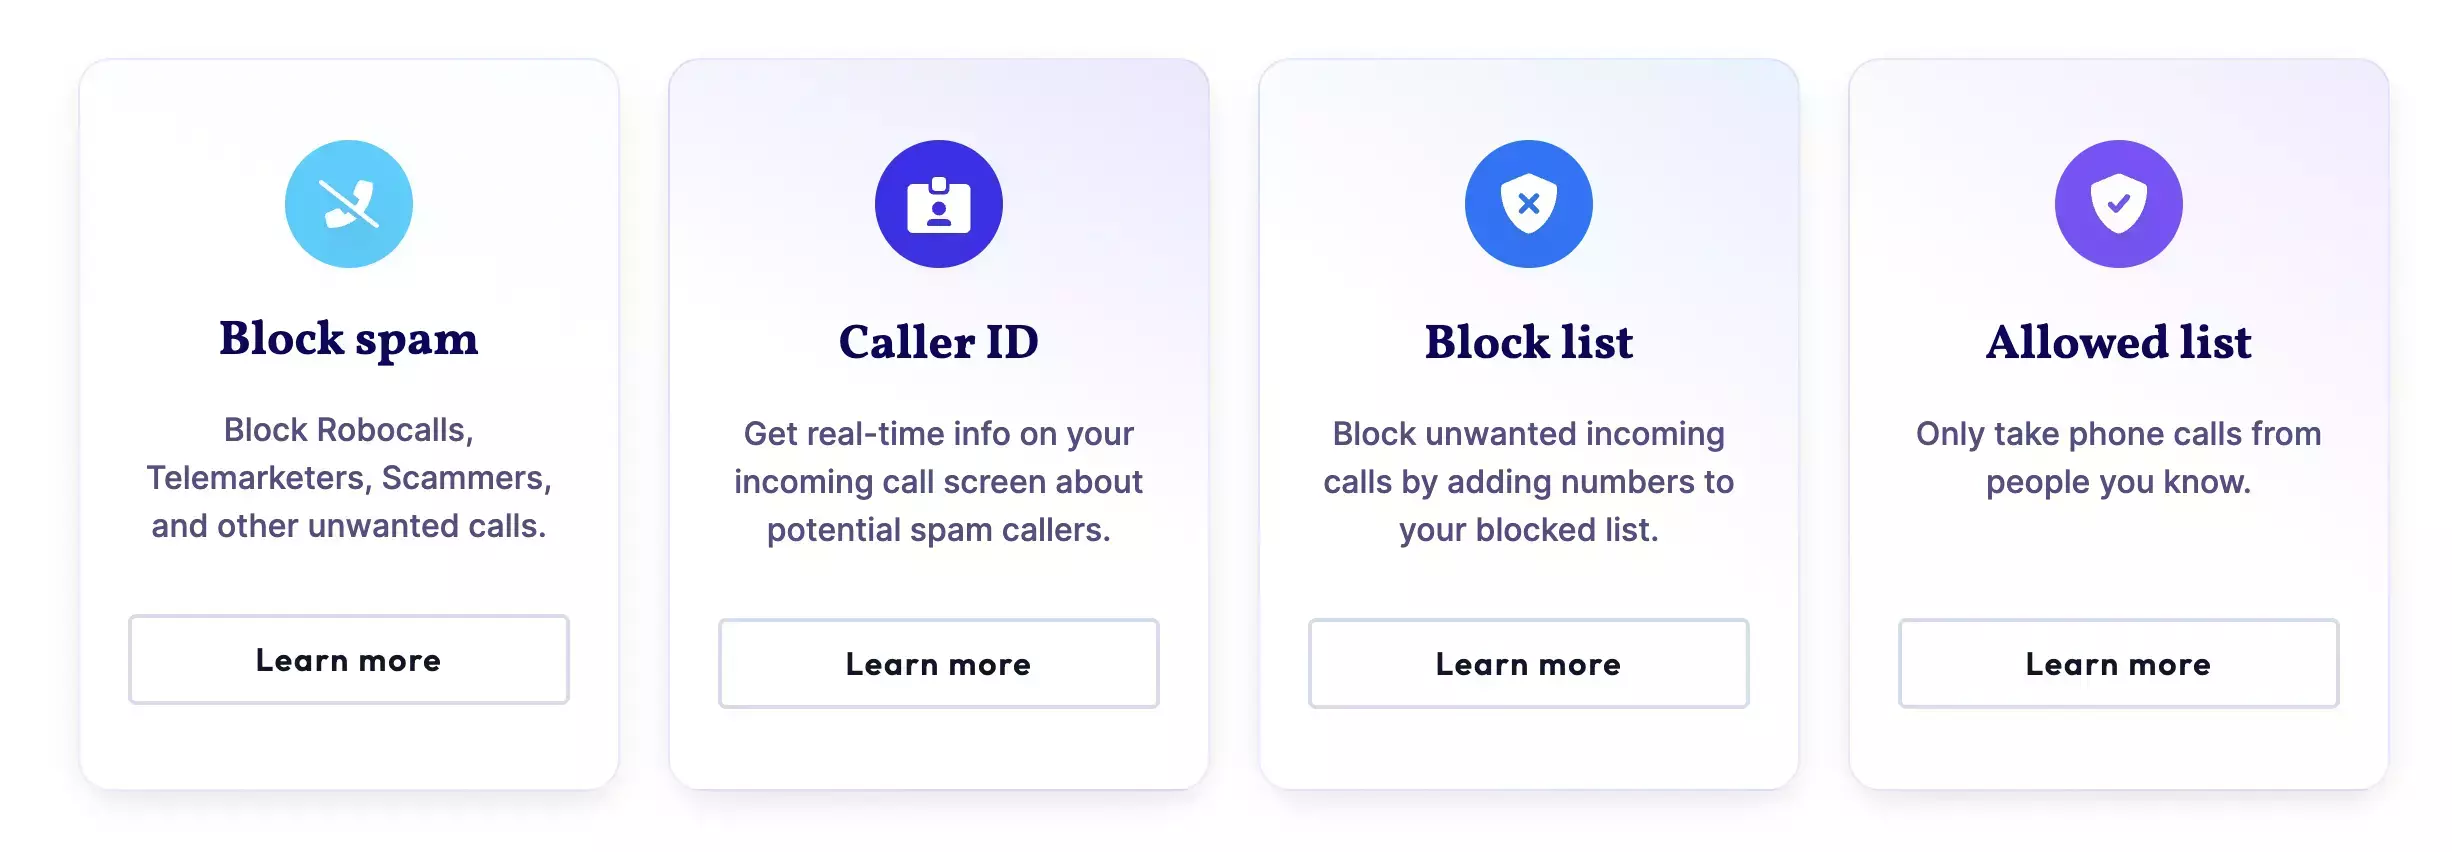 Image of Community Phone spam blocking services